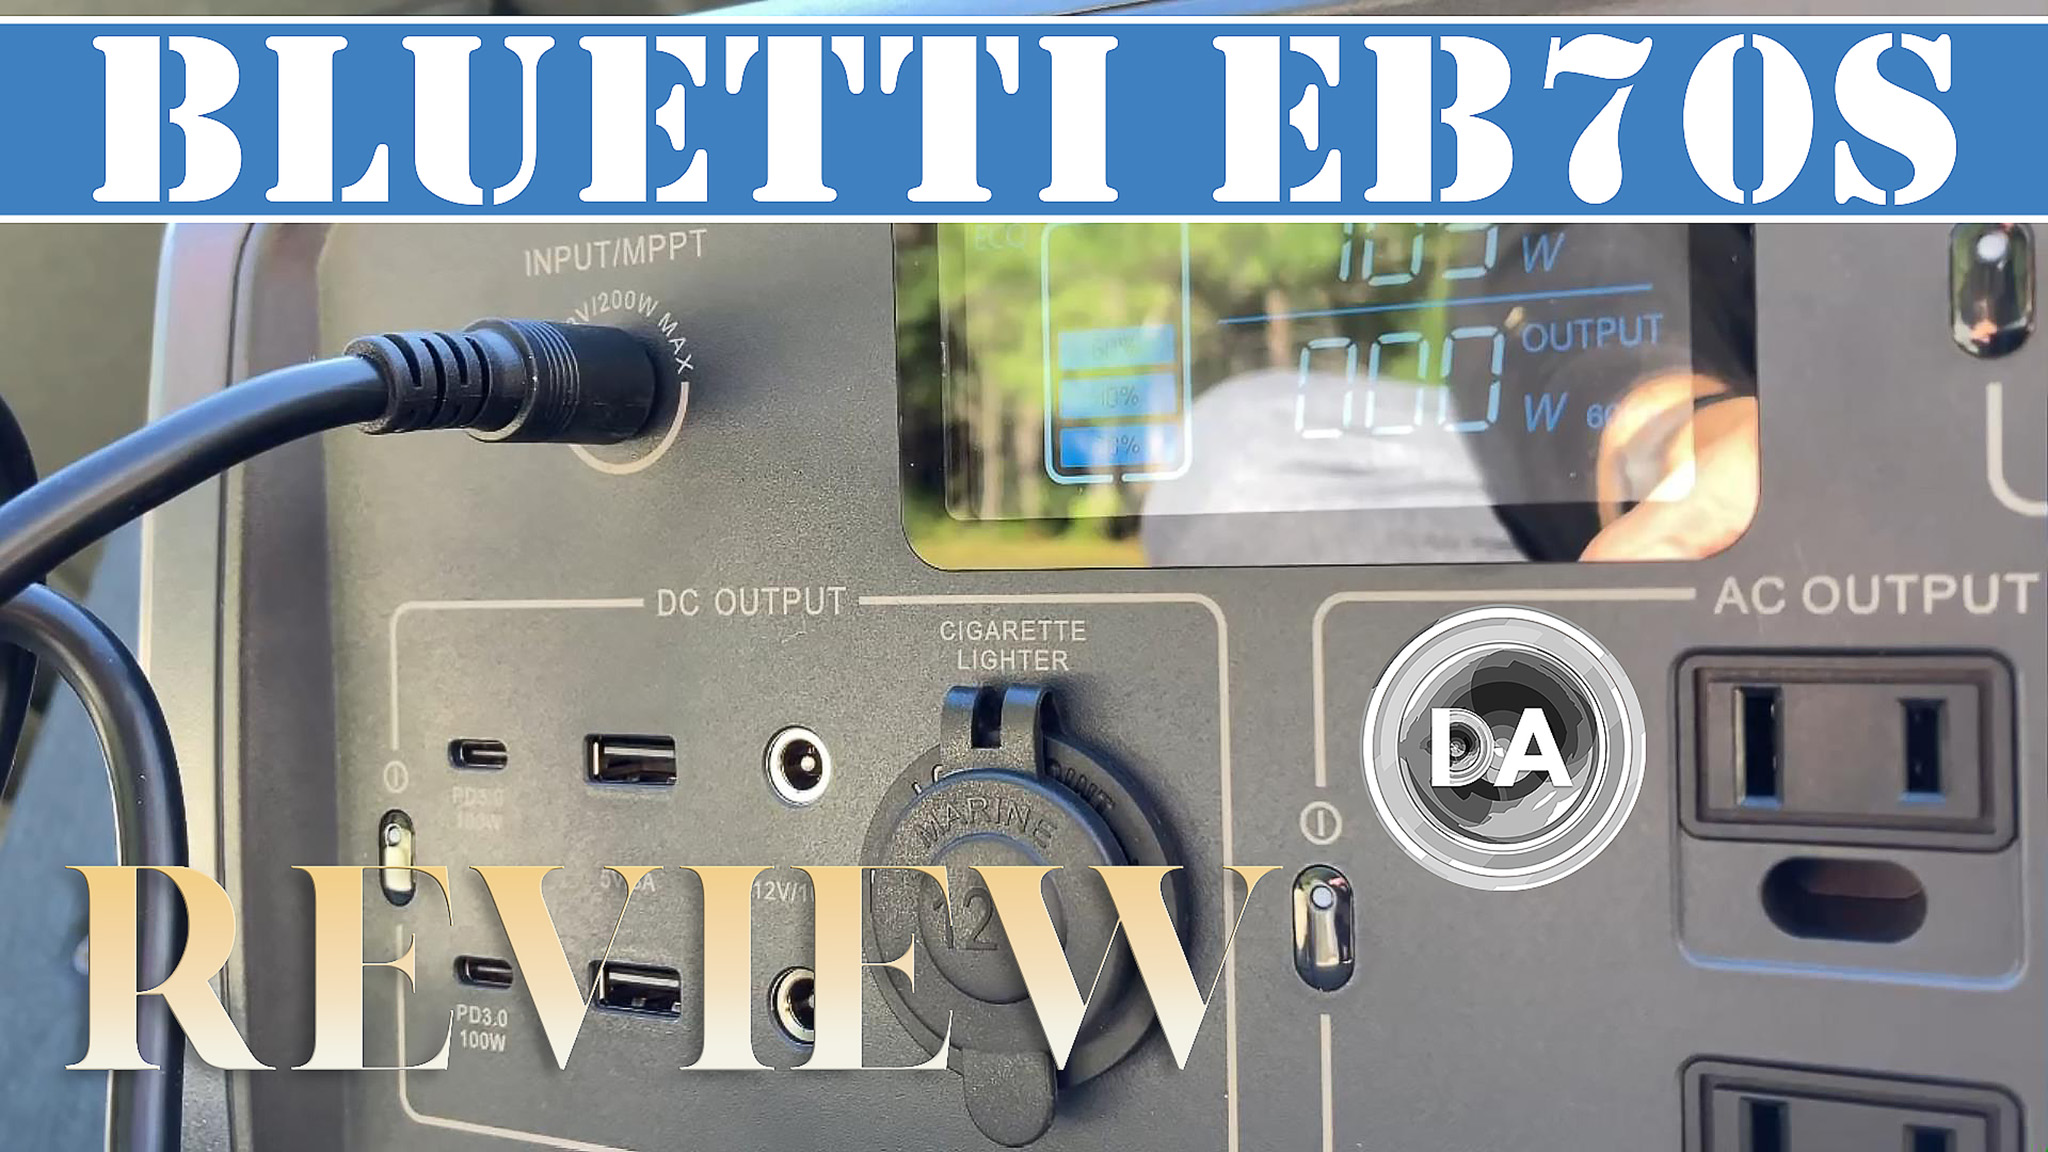 Bluetti EB70 portable power station: Tried & Tested review